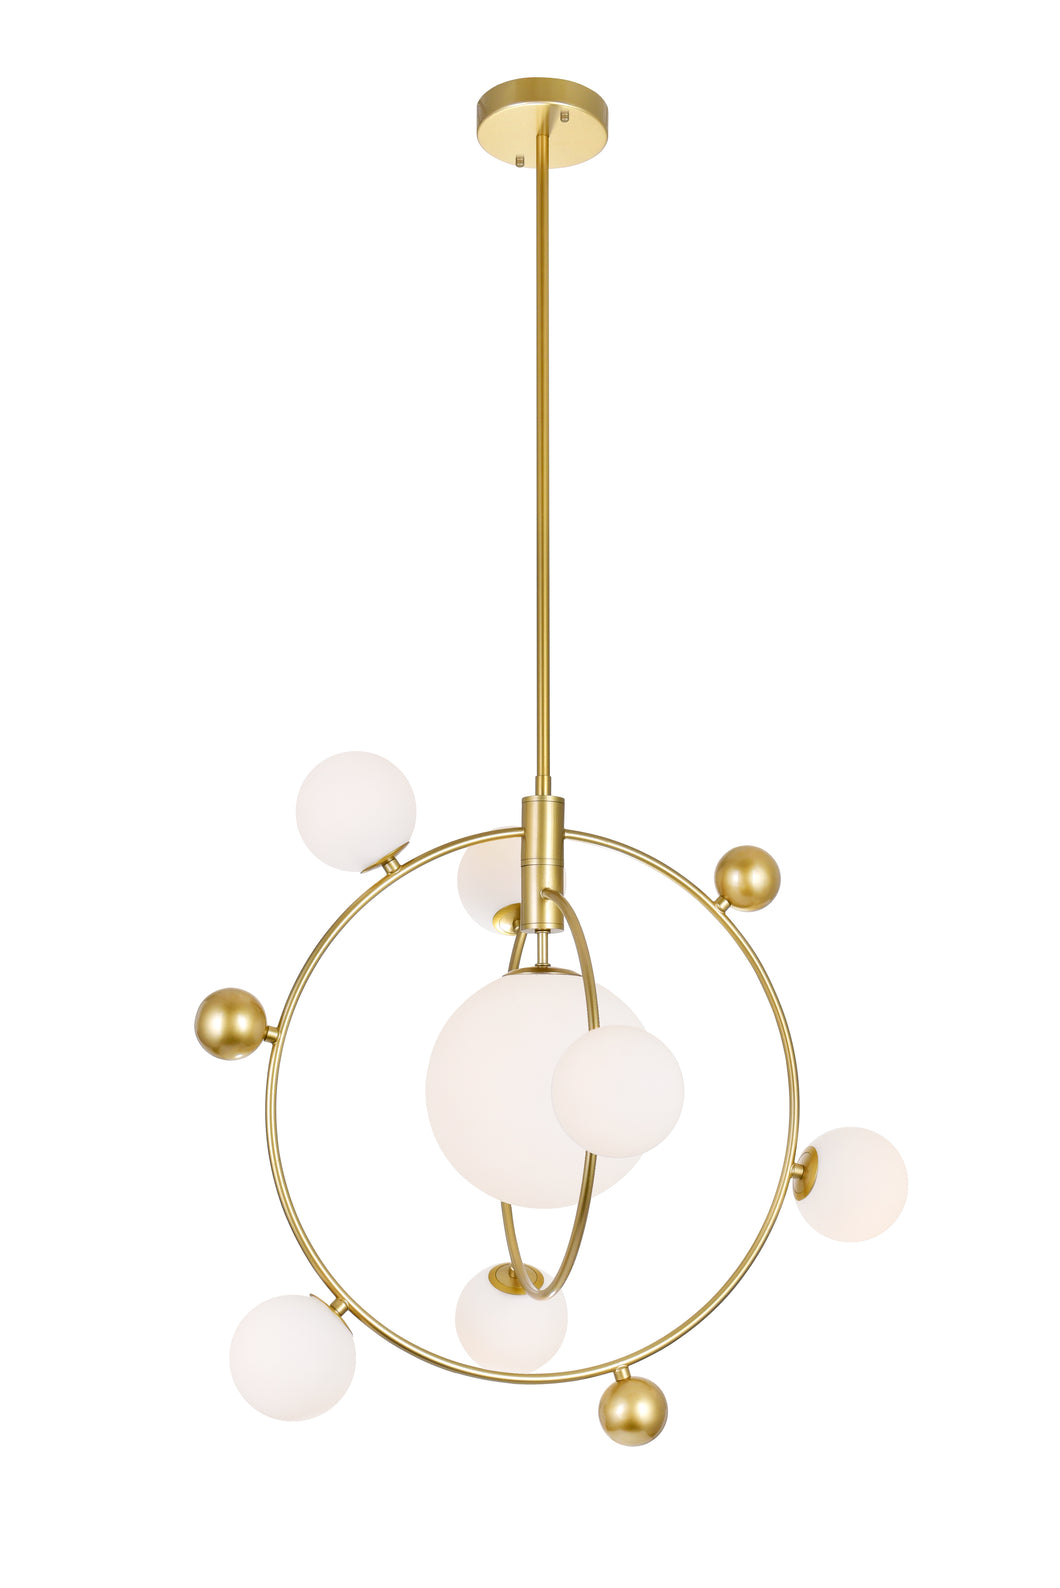 8 Light Chandelier with Medallion Gold Finish